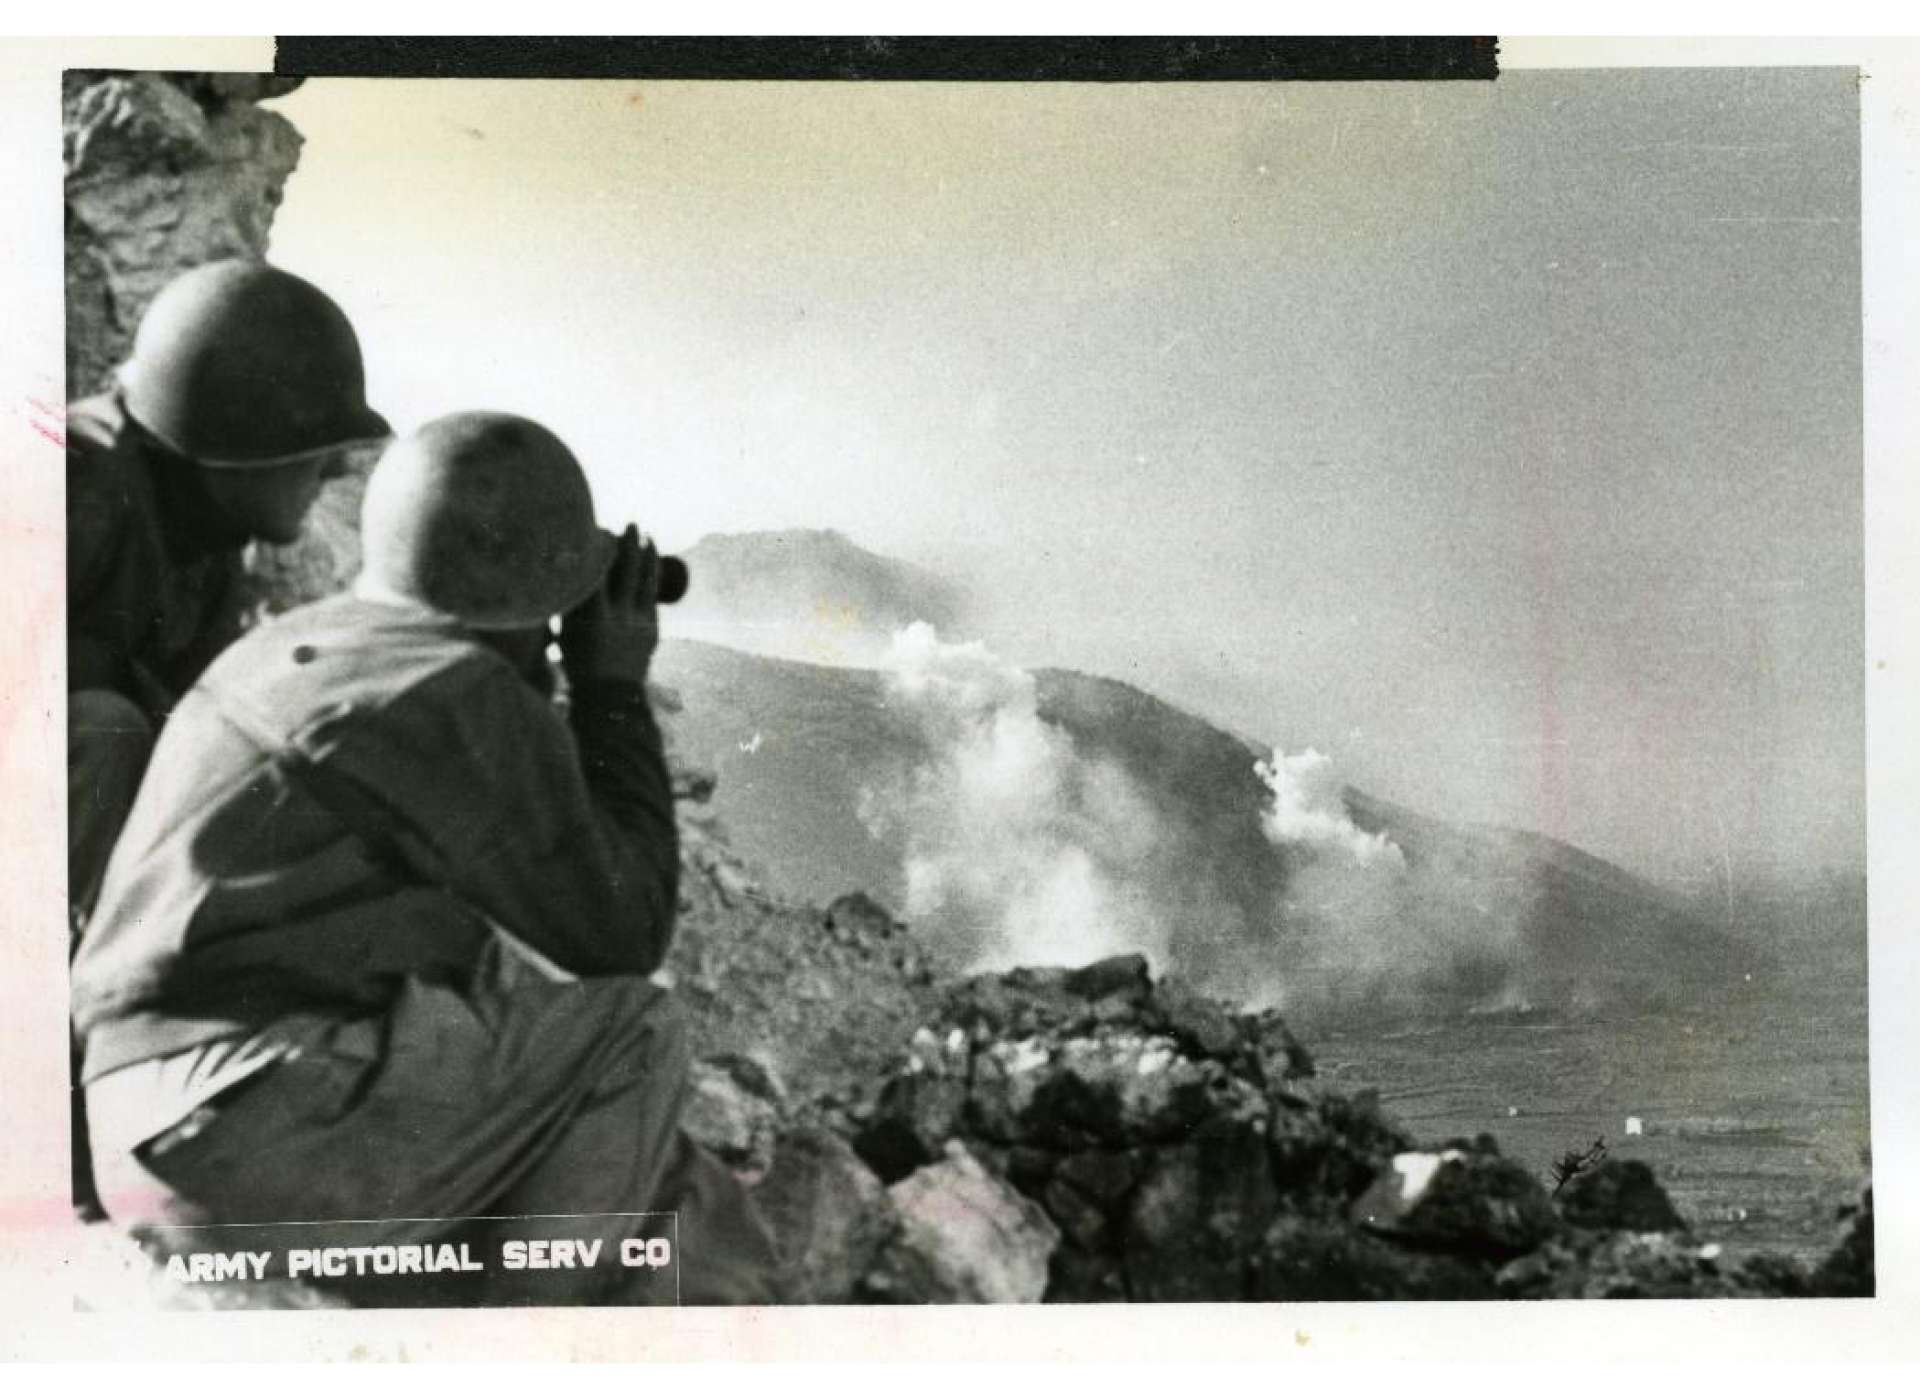 American artillery observers peer through their field glasses to watch enemy fortifications being shelled near San Pietro, Italy, 1943. Gift of Ms. Regan Forrester, 2002.337.414